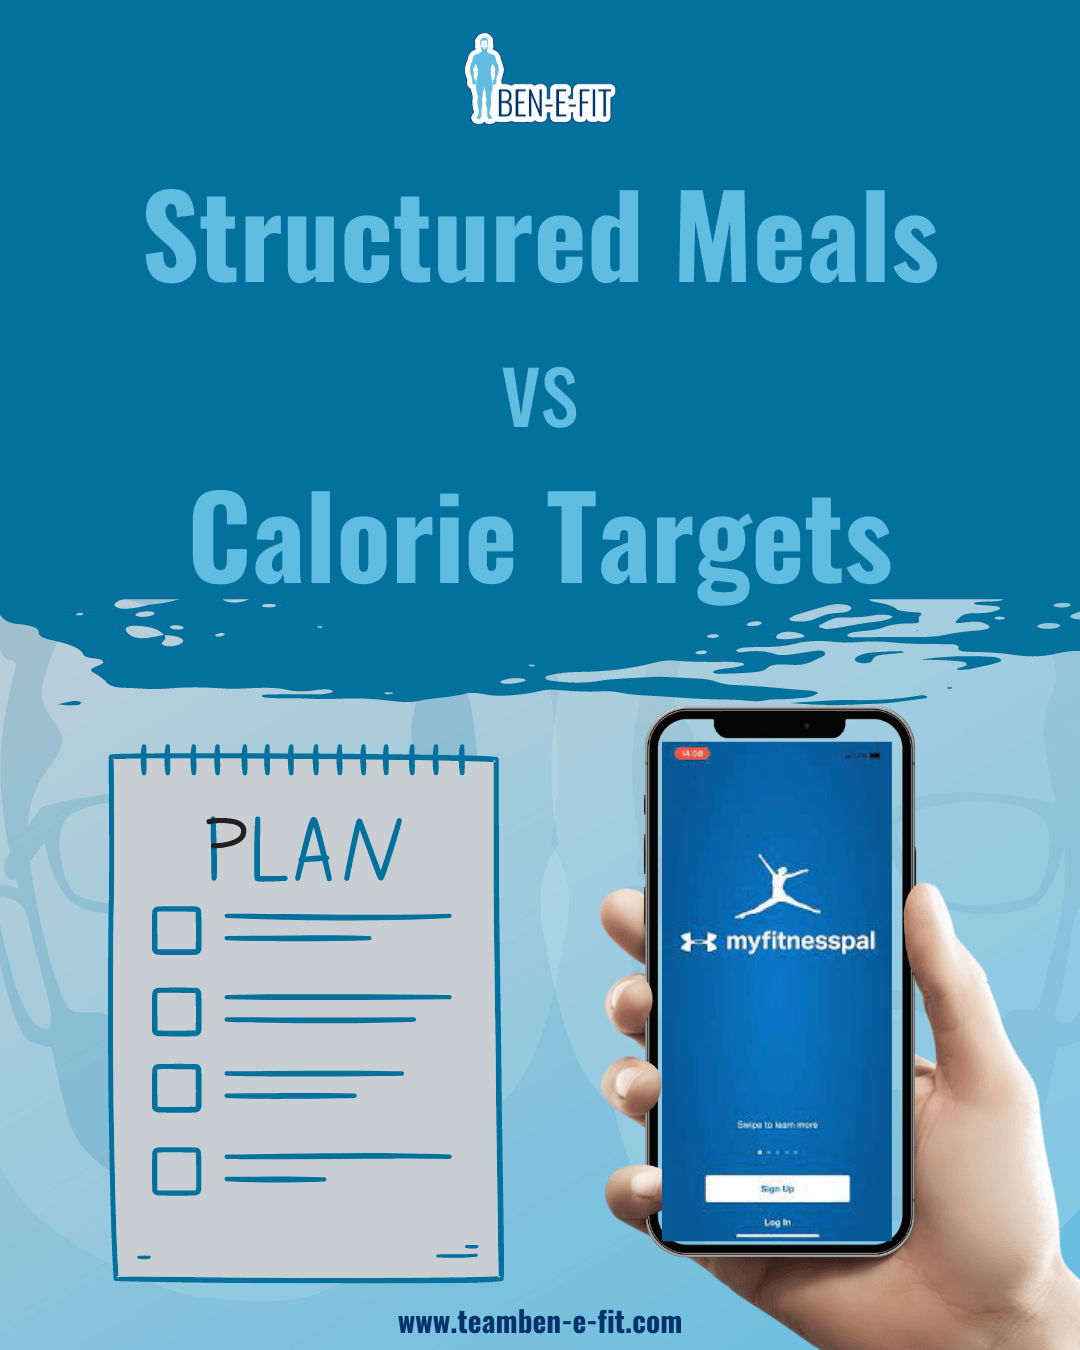 calories, macros, meal plans, fat loss, fitness, diet, nutrition